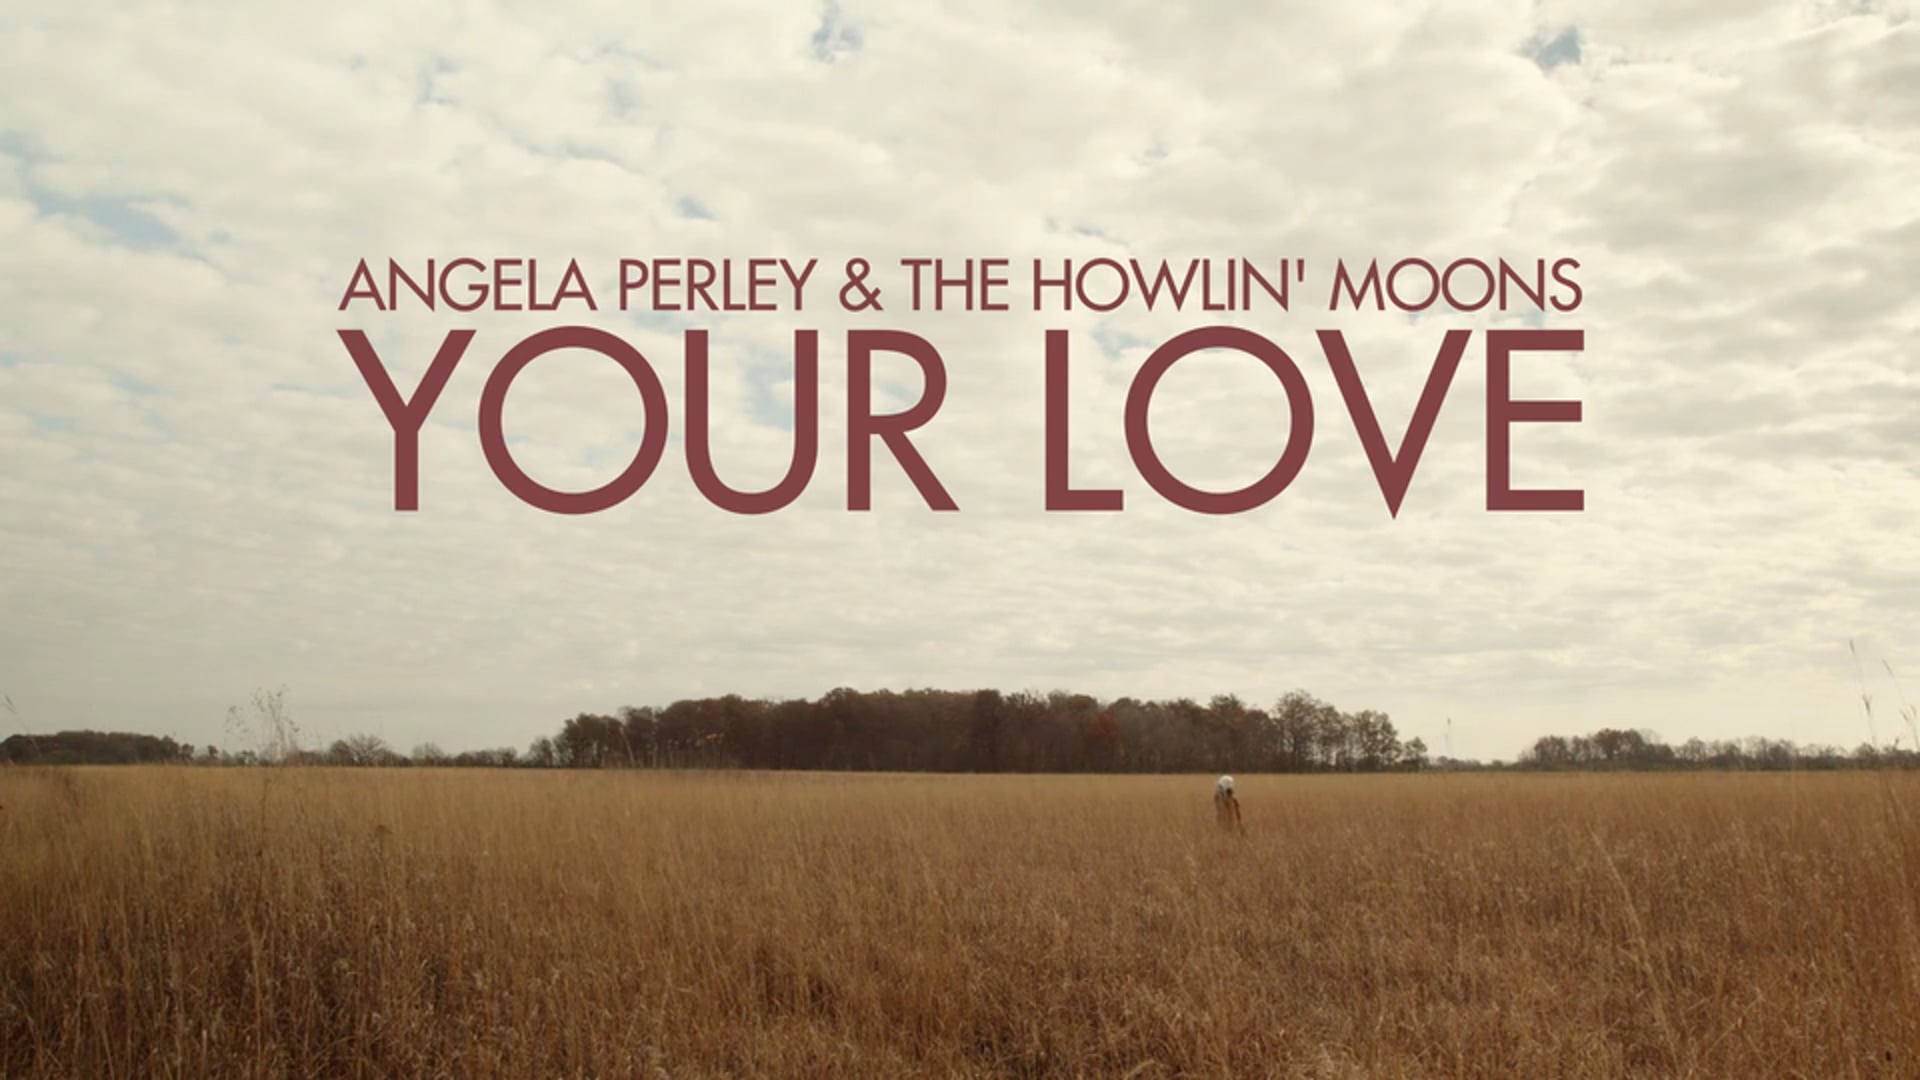 Angela Perley & The Howlin' Moons | Your Love (Official Music Video) Final